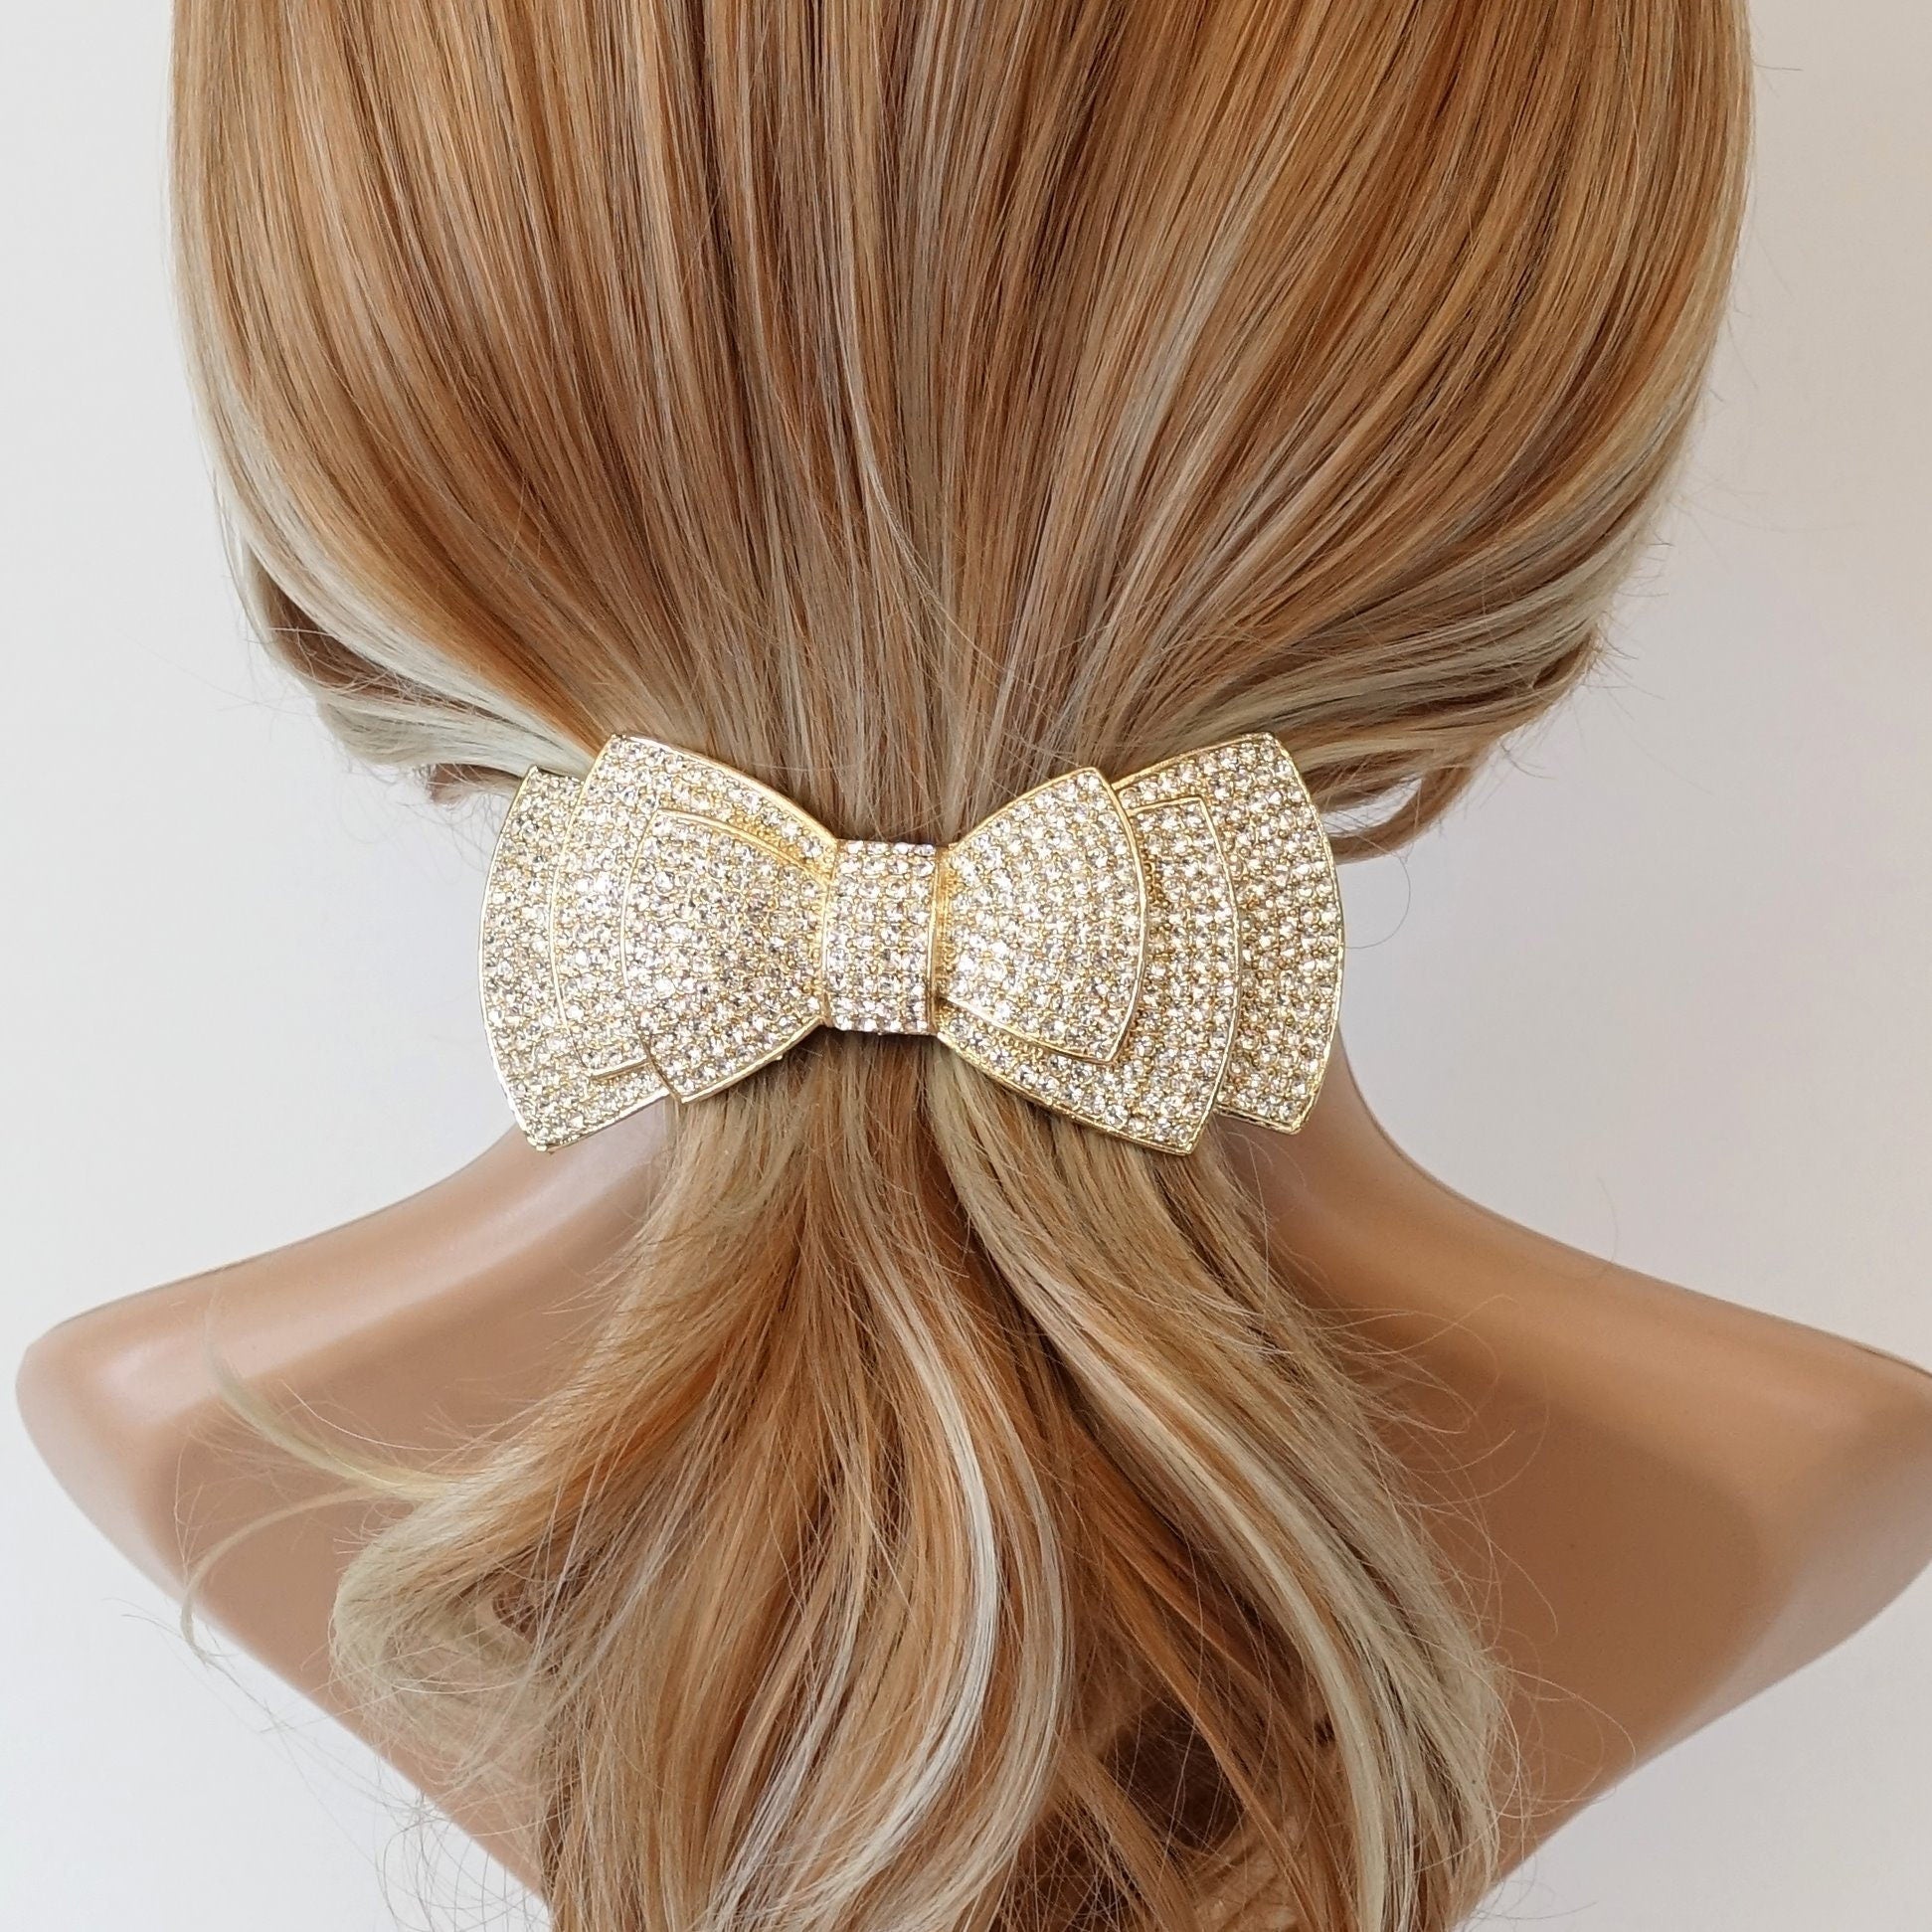 veryshine.com Barrette (Bow) layered hair bow rhinestone decorated french hair barrette crystal jewel decorated women hair accessory